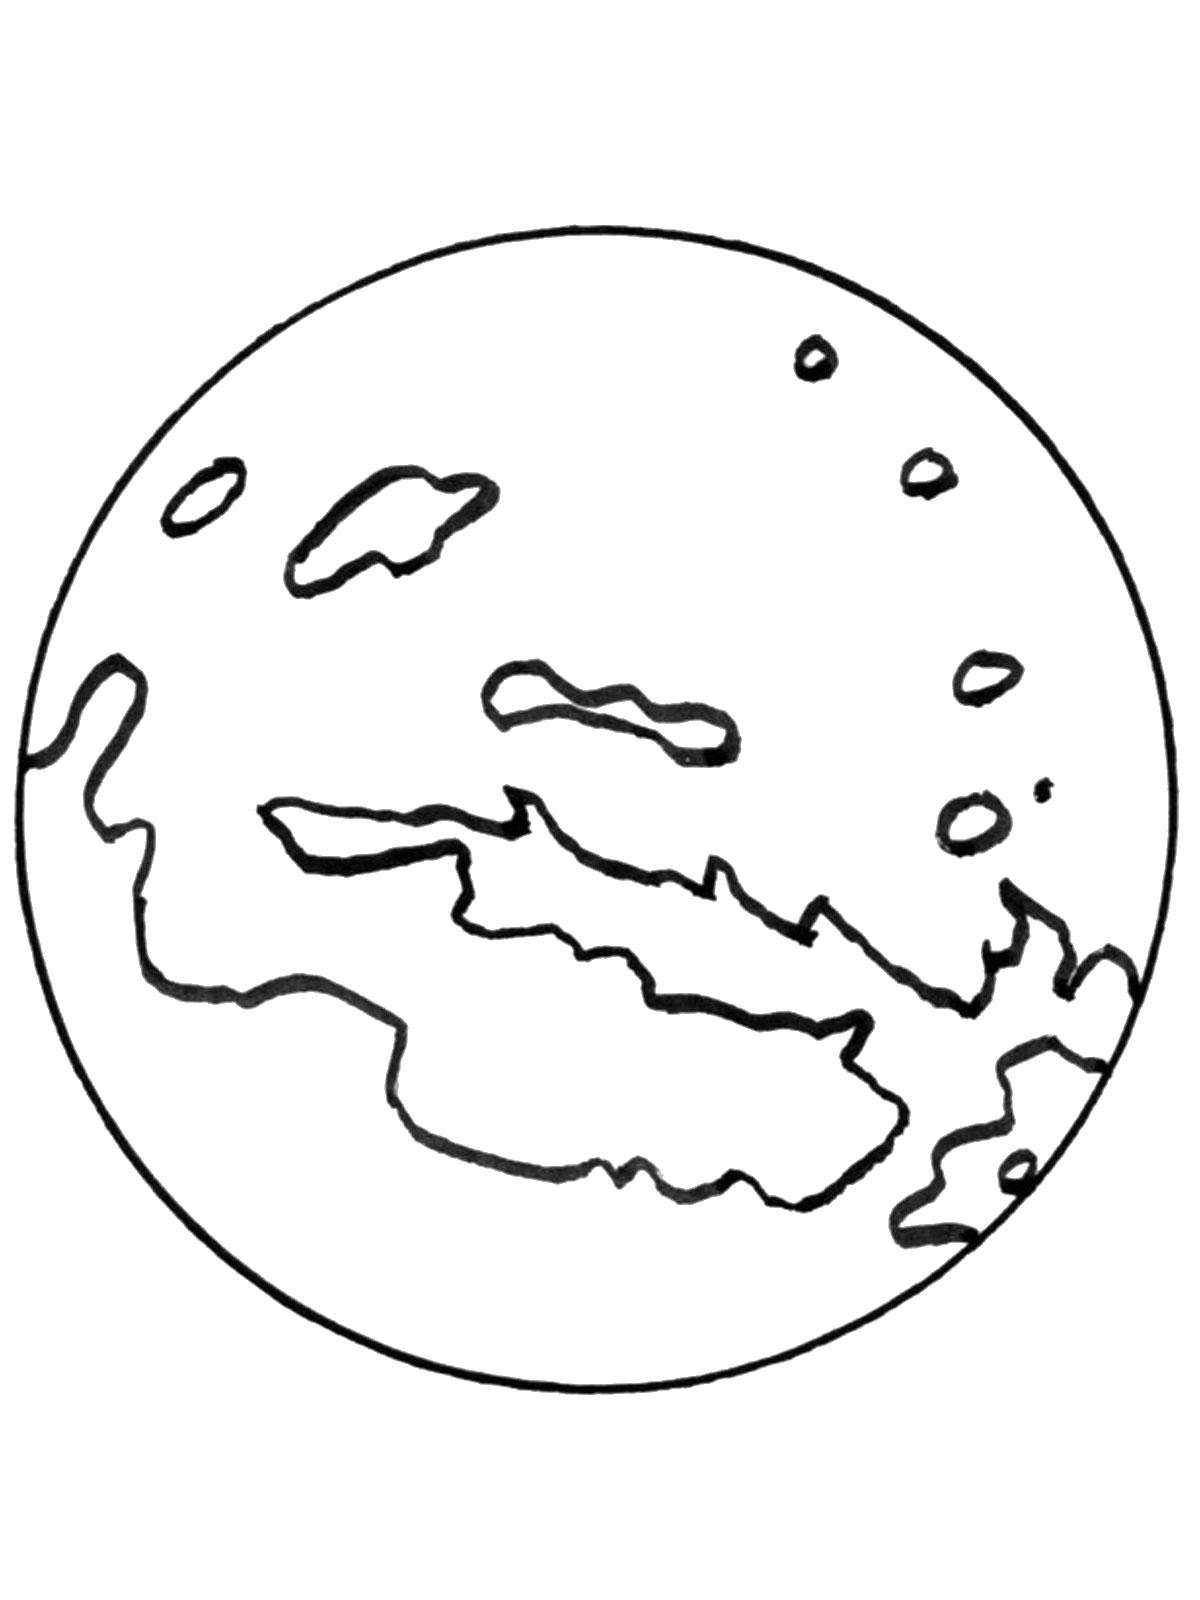 Coloring Planet. Category space. Tags:  Space, planet, universe, Galaxy.